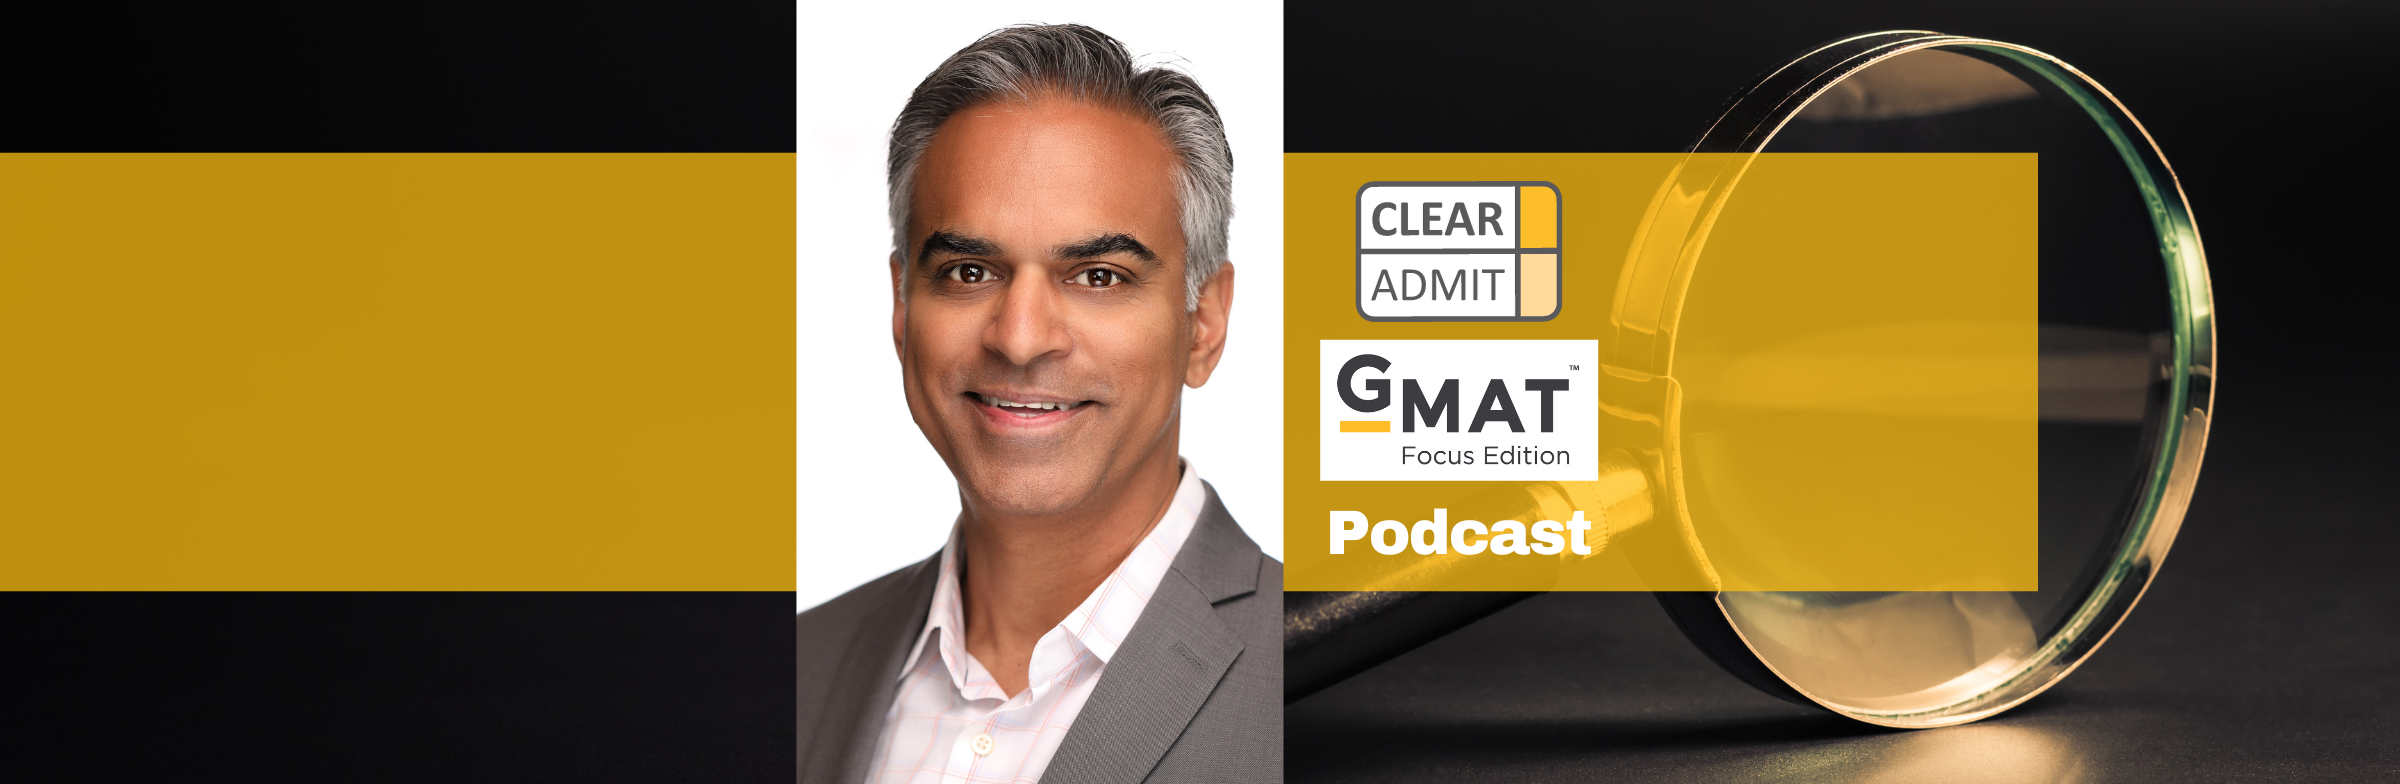 Image for Episode 315: GMAT Focus Edition Q&A with GMAC’s Manish Dharia